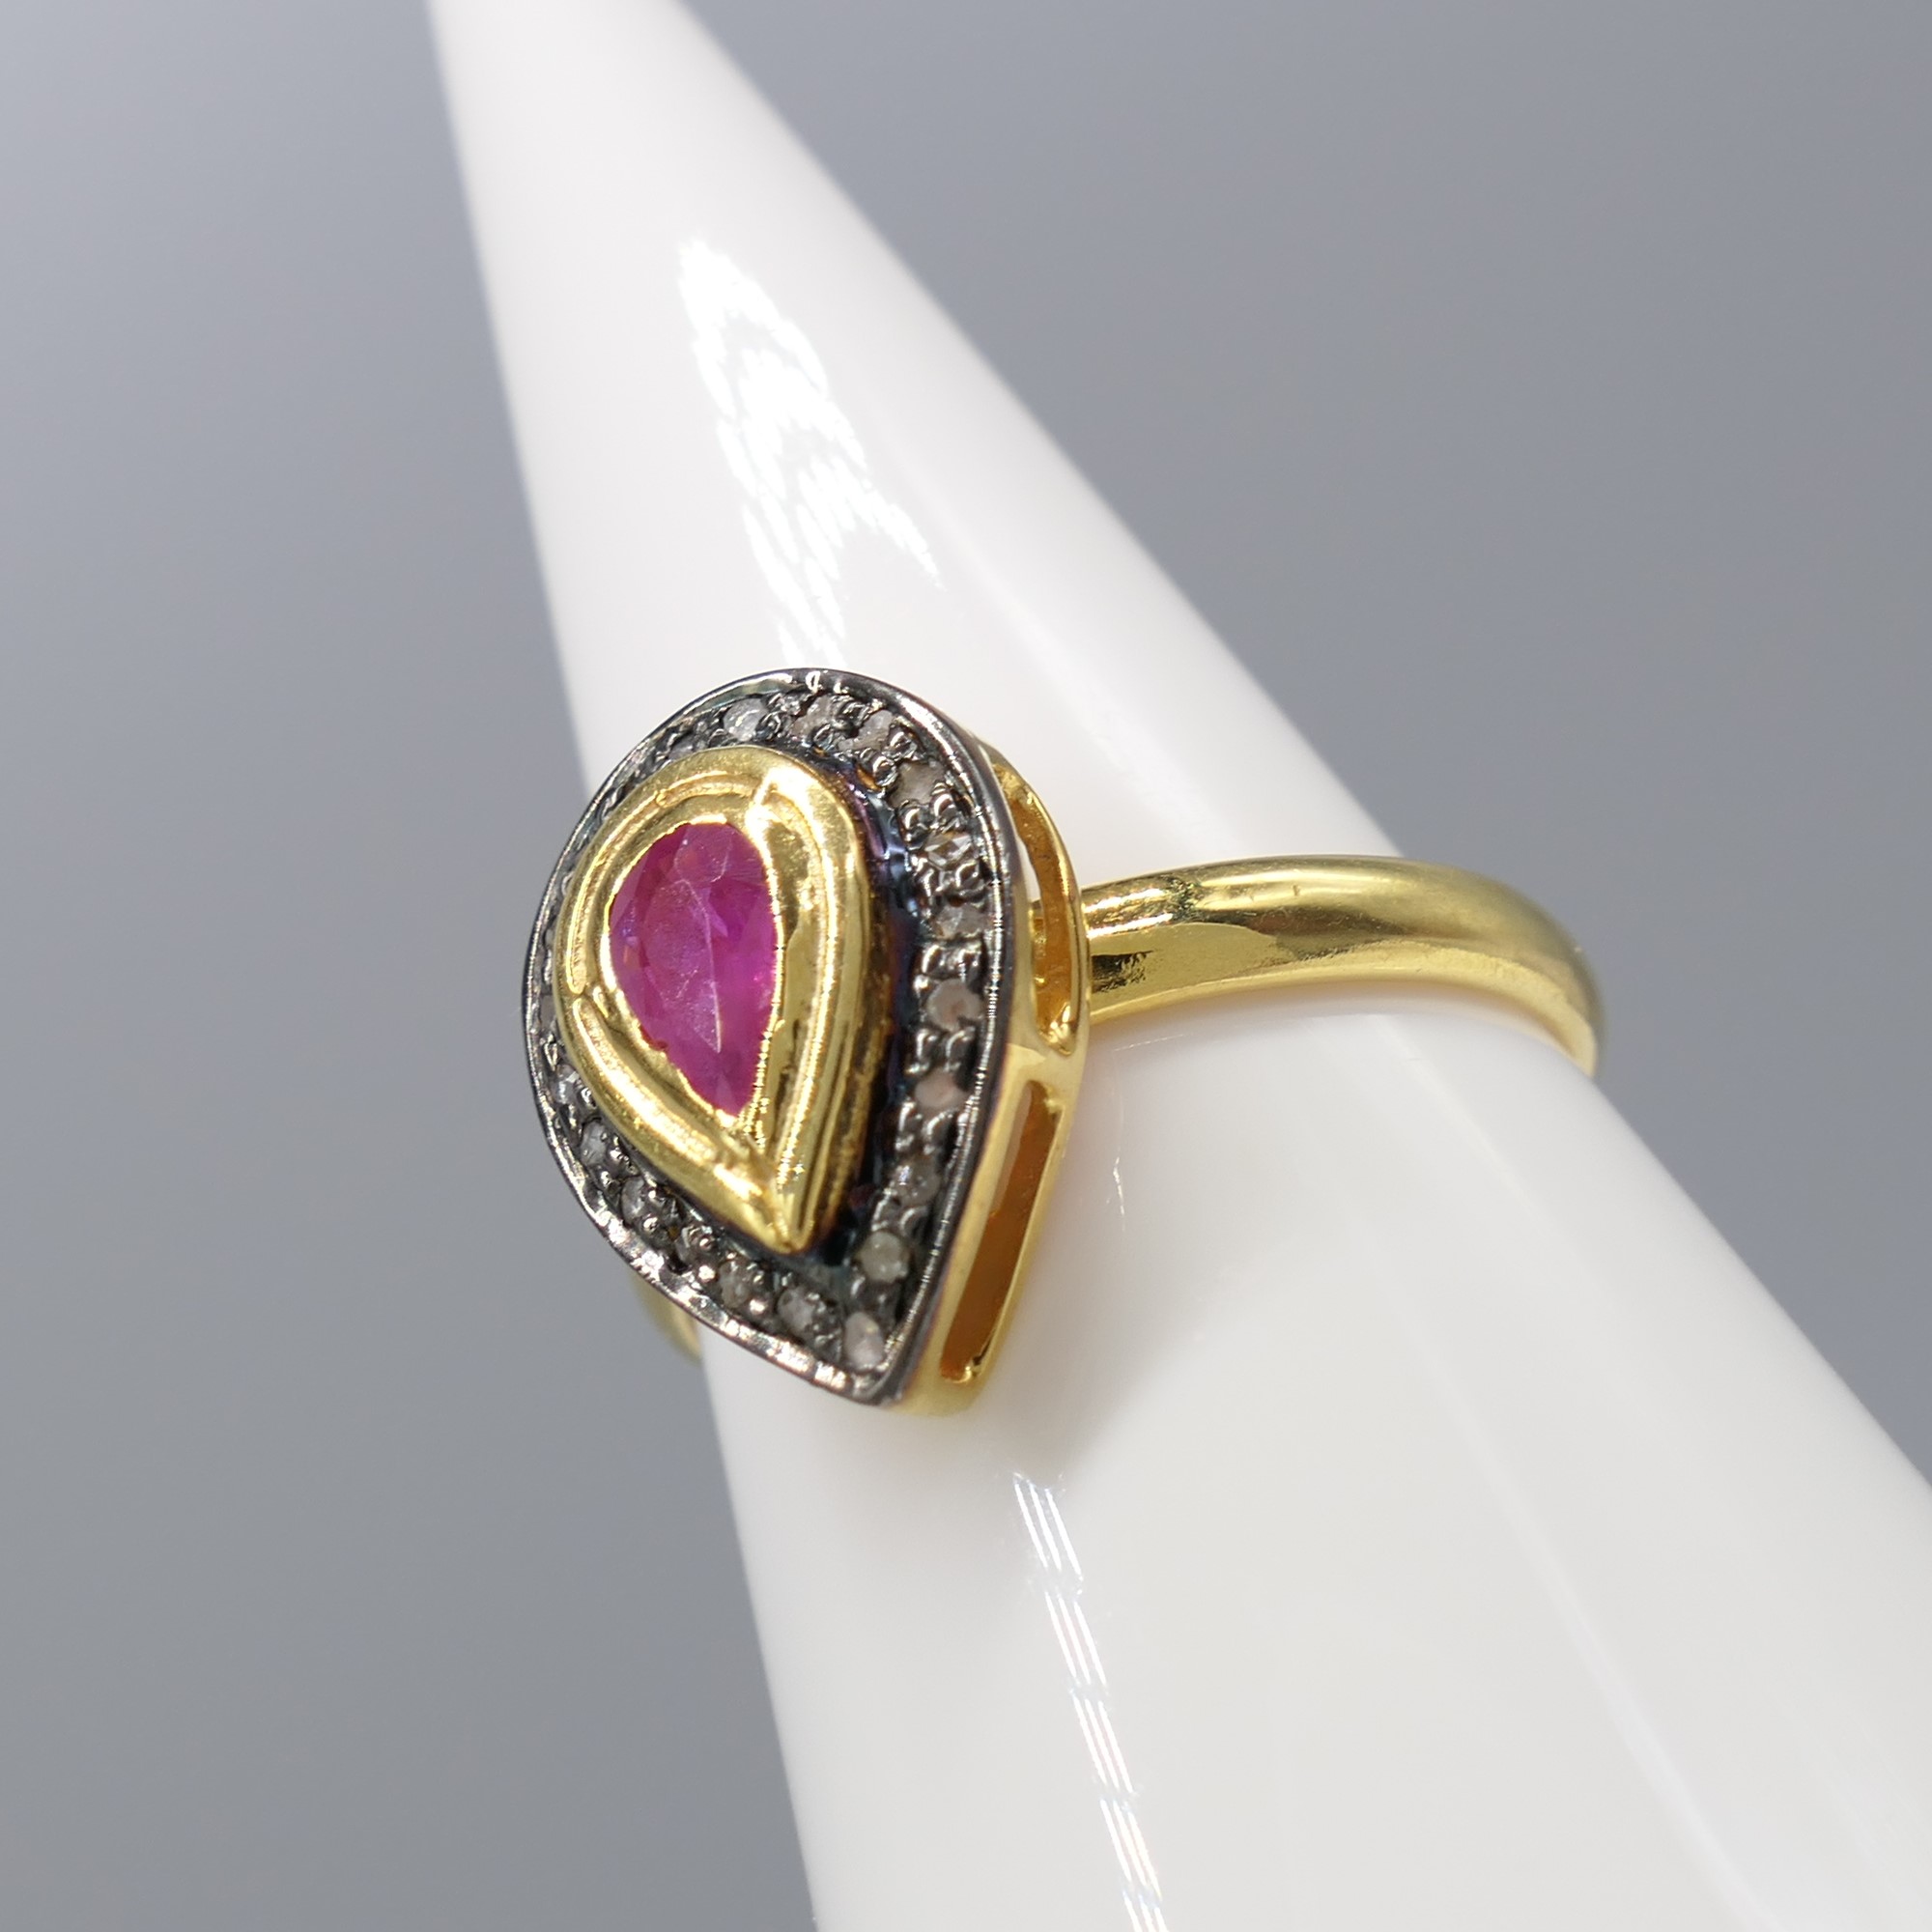 Hand-Made Silver Gilt Ring Set With Ruby and Diamonds - Image 3 of 6